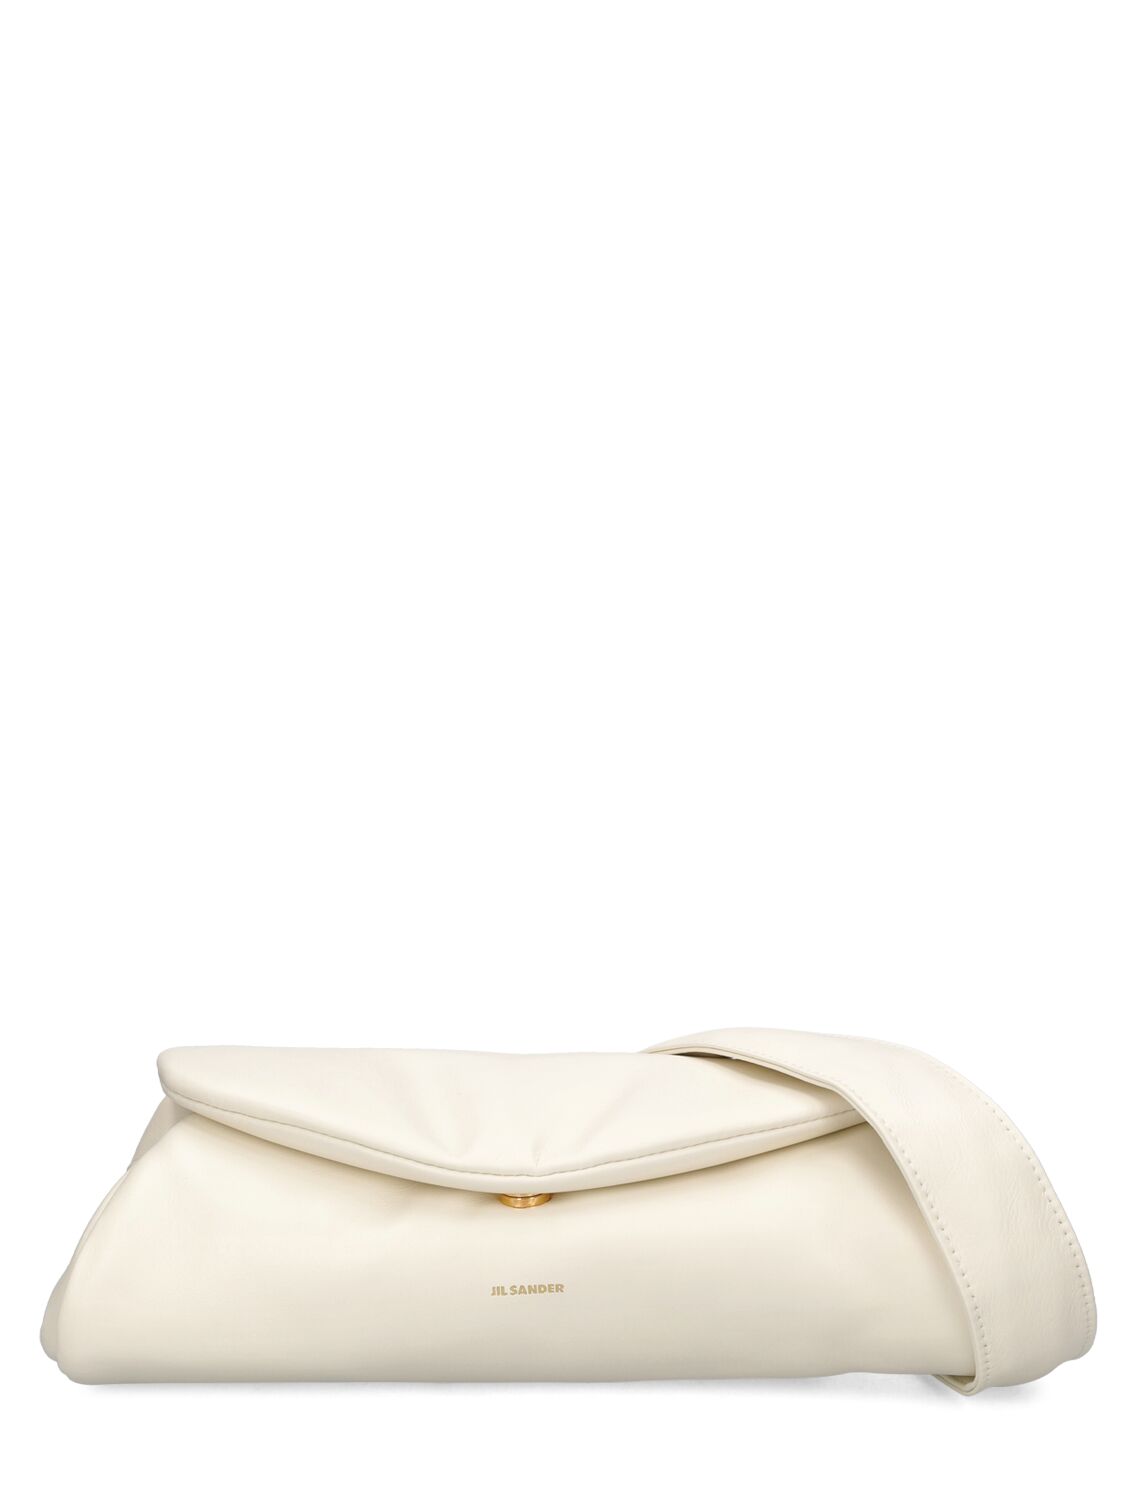 Jil Sander Small Cannolo Padded Leather Bag In Eggshell